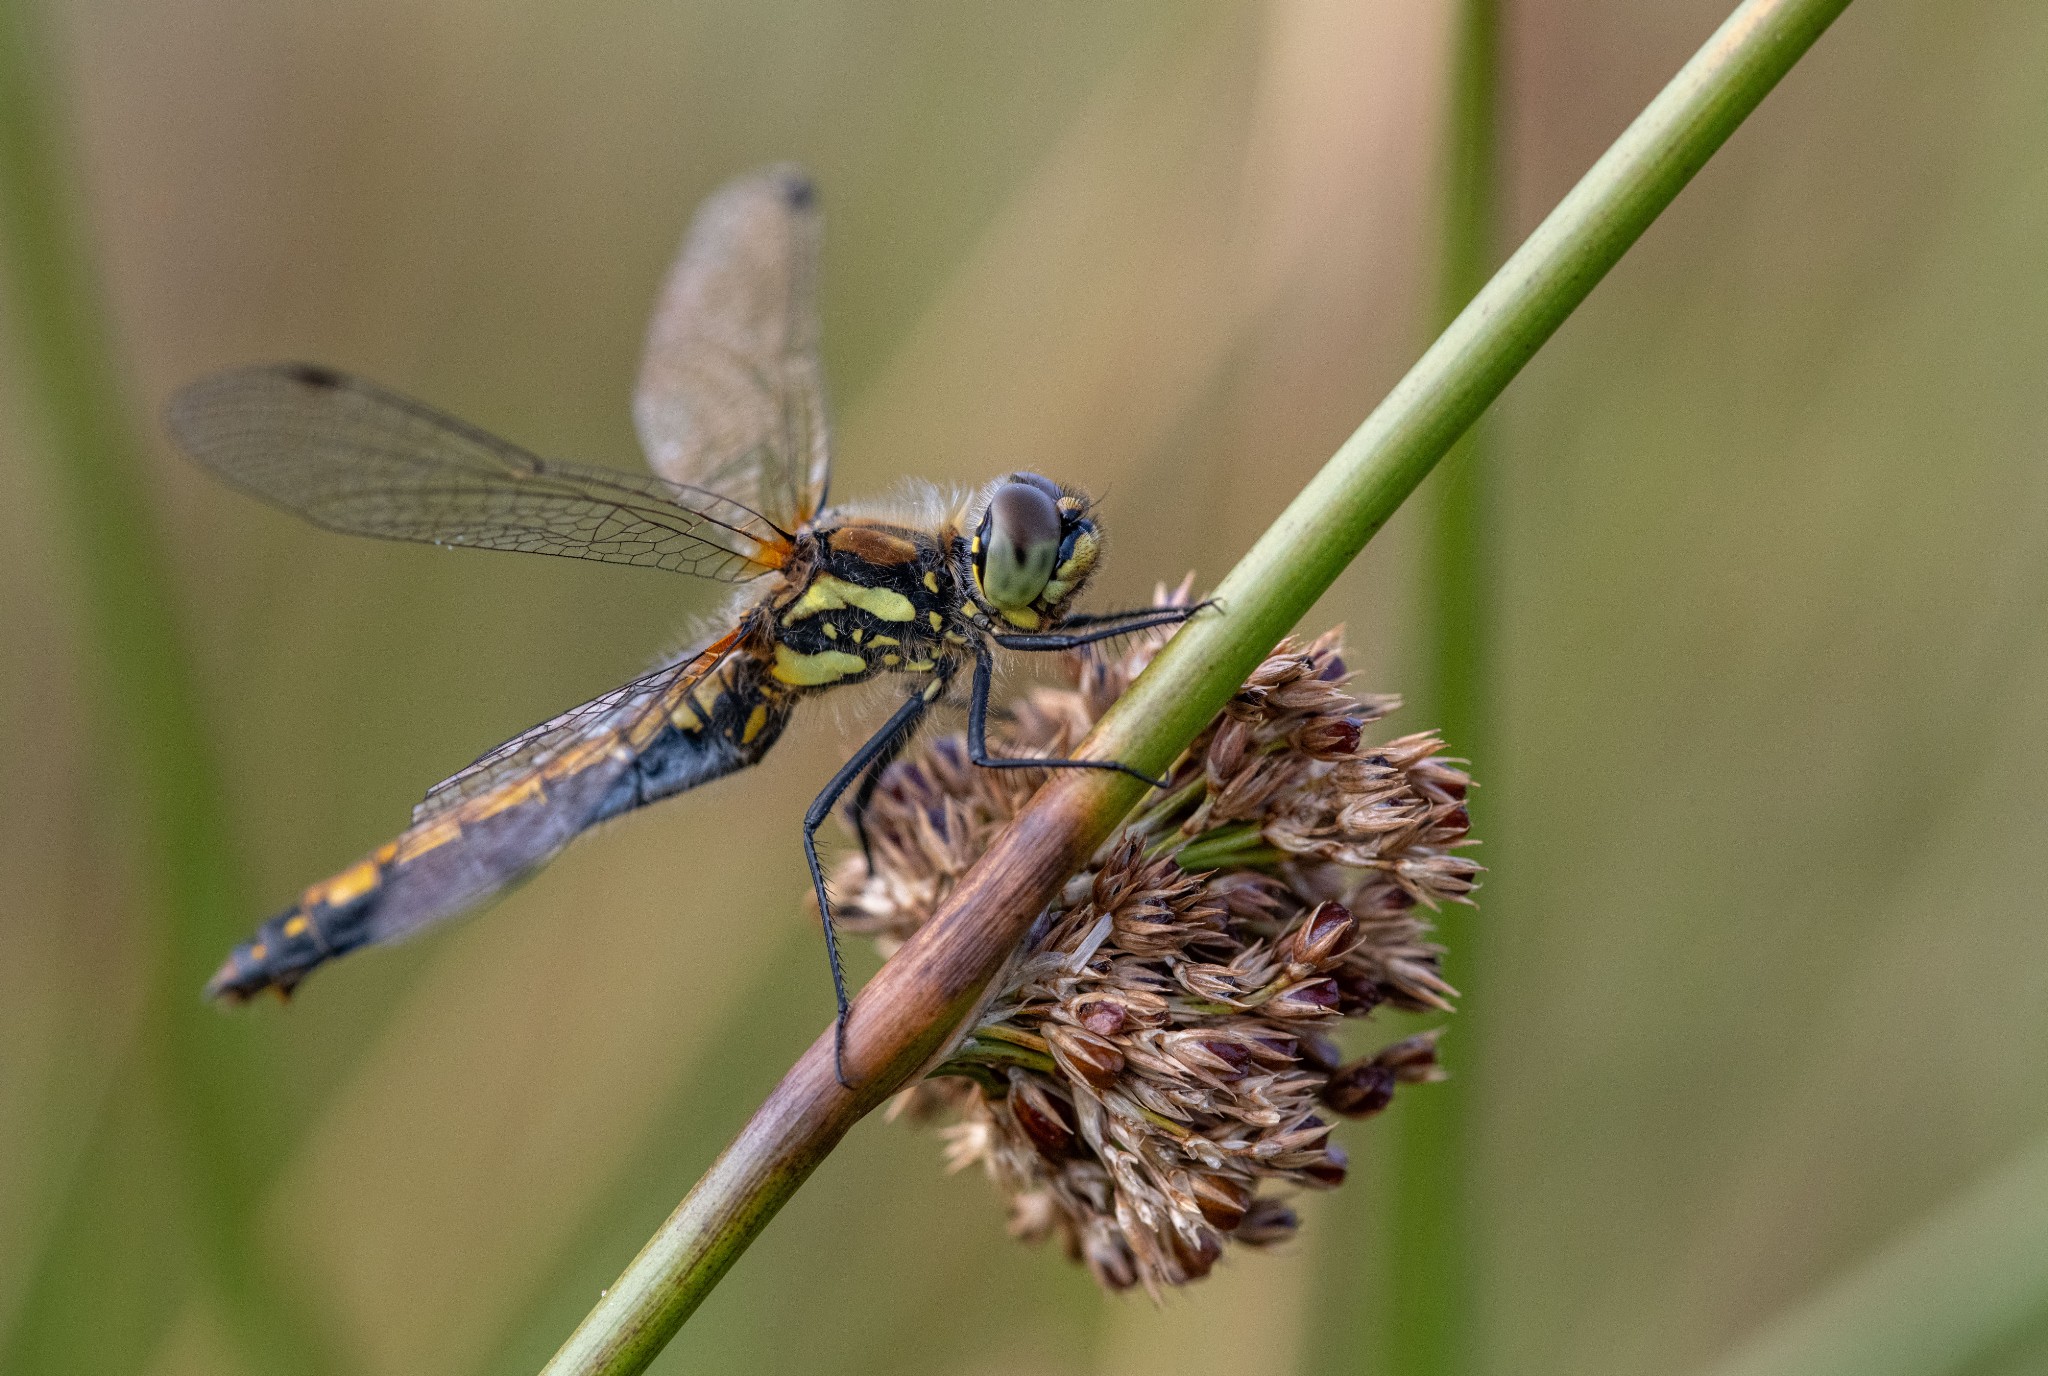 Black darter dragonfly in Hoy, Orkney - image by Raymond Besant